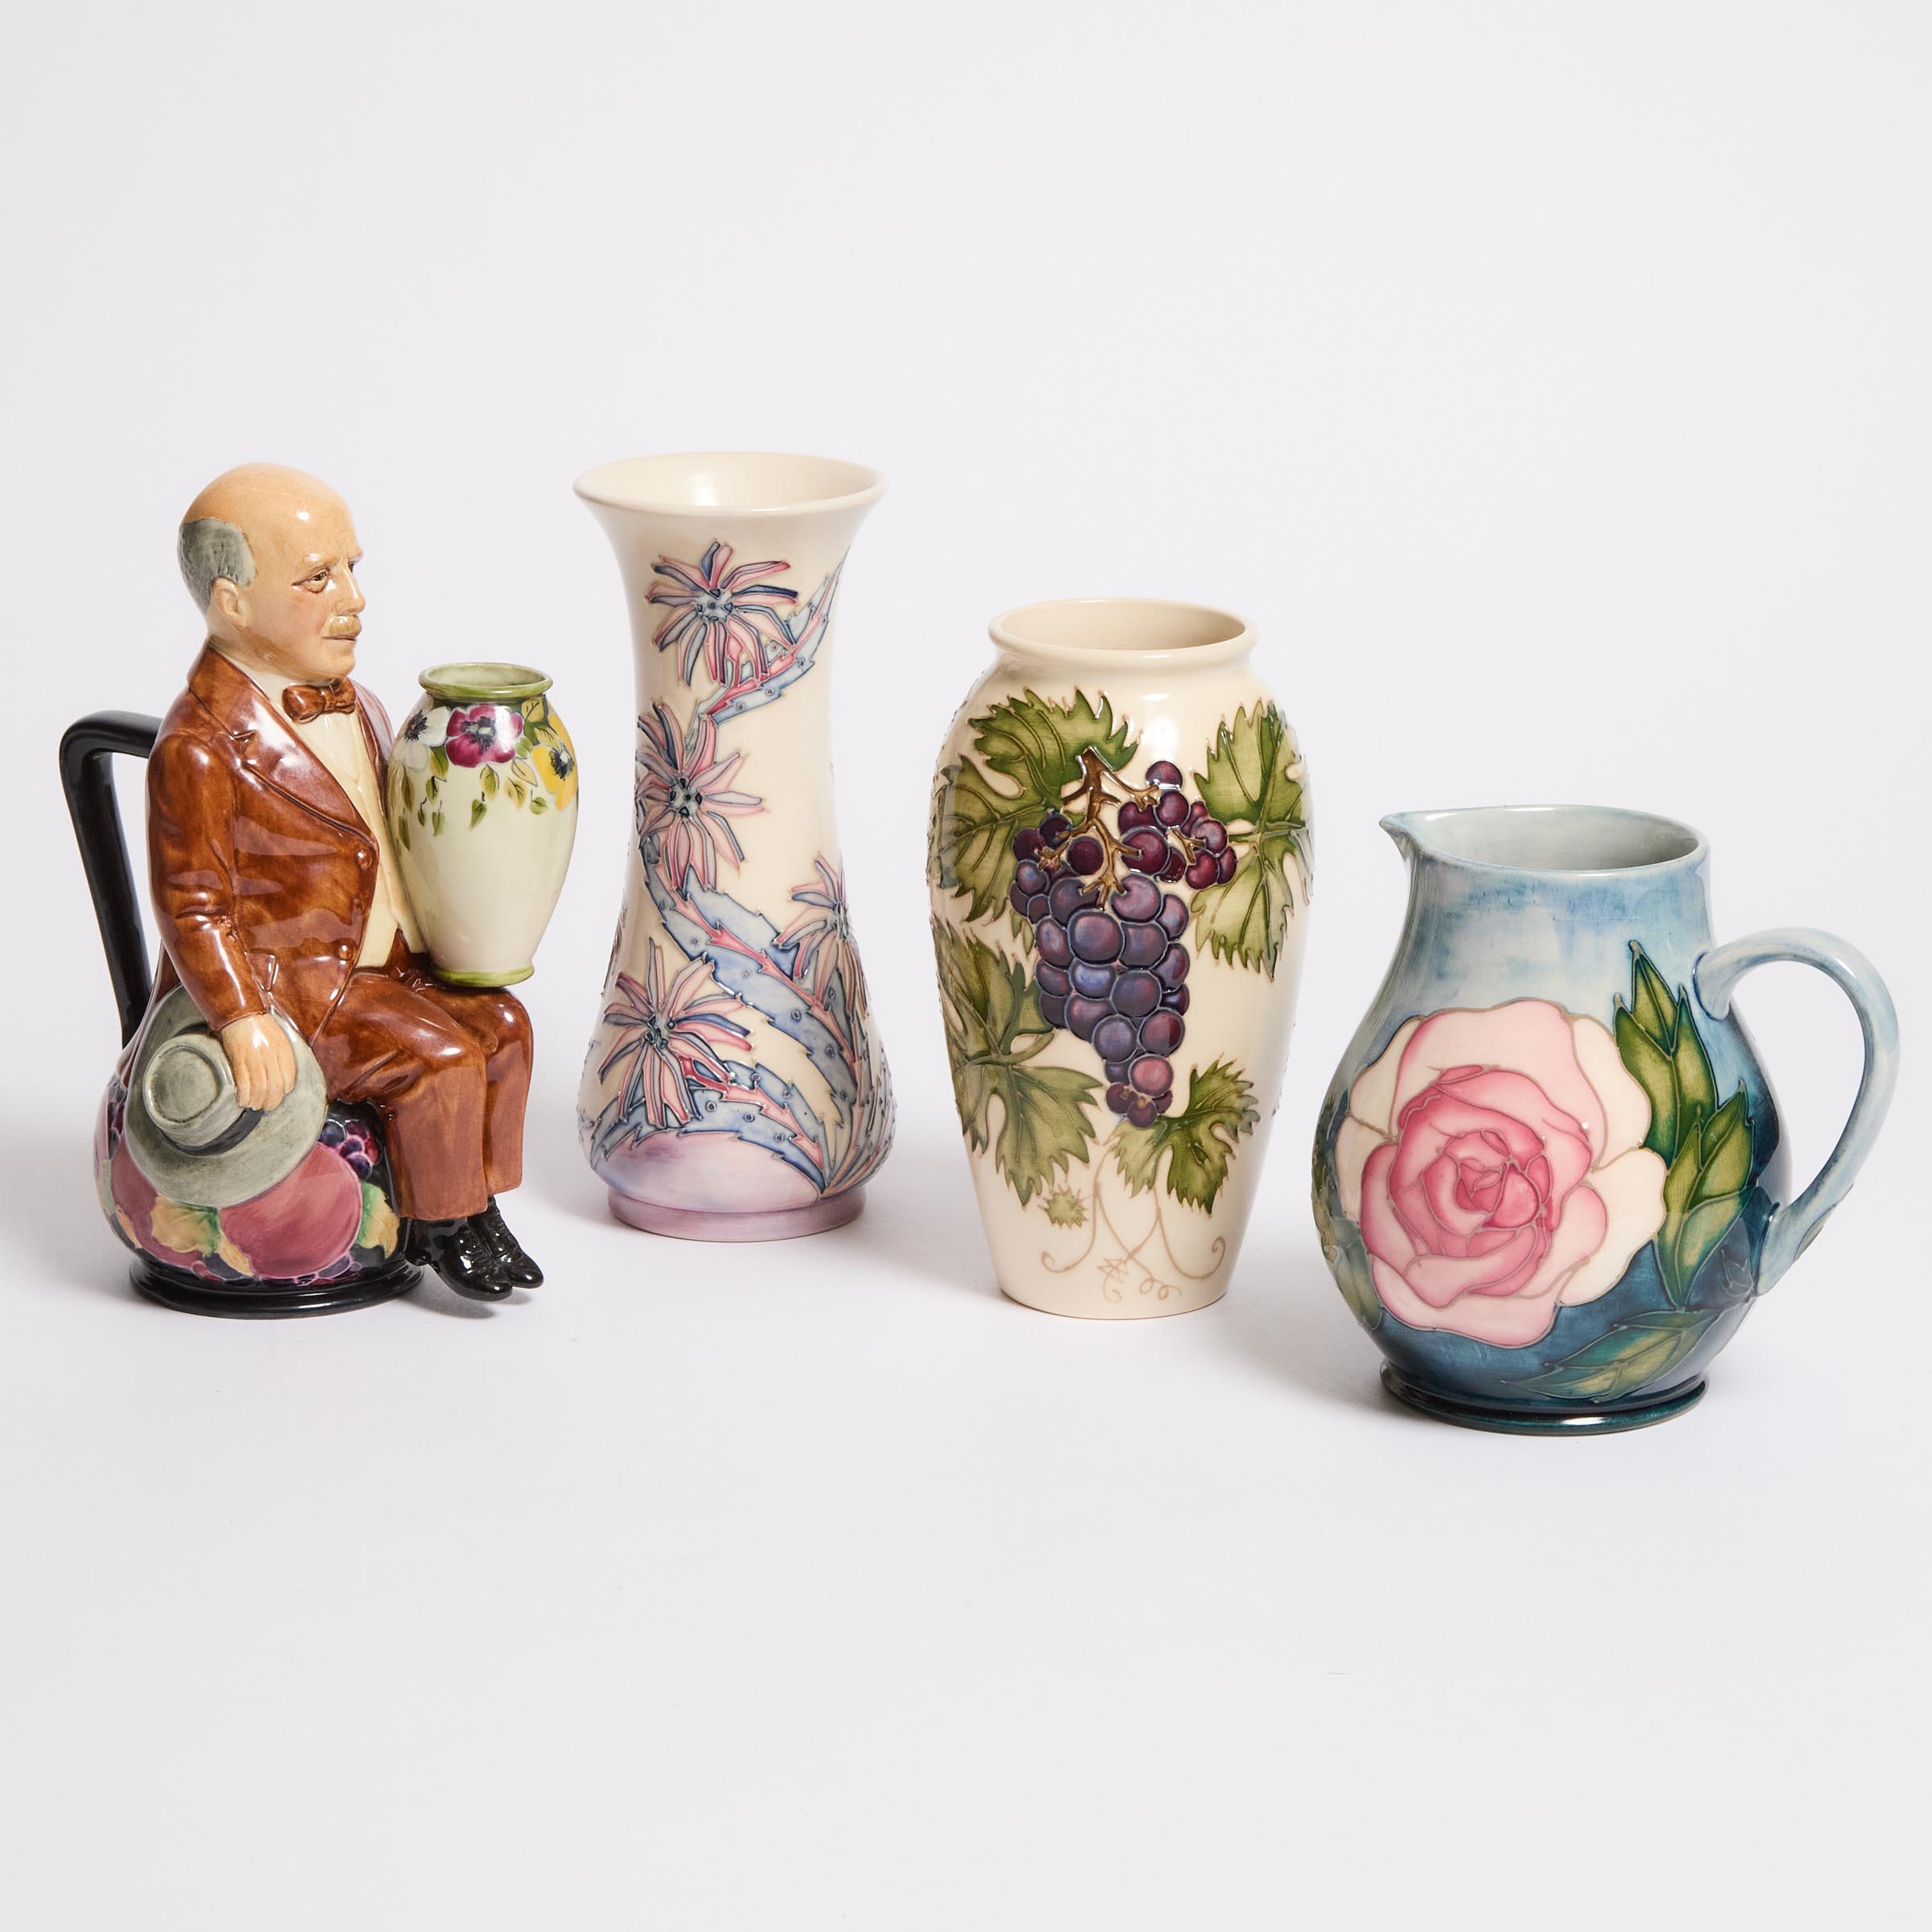 Two Moorcroft Vases, Pitcher, and